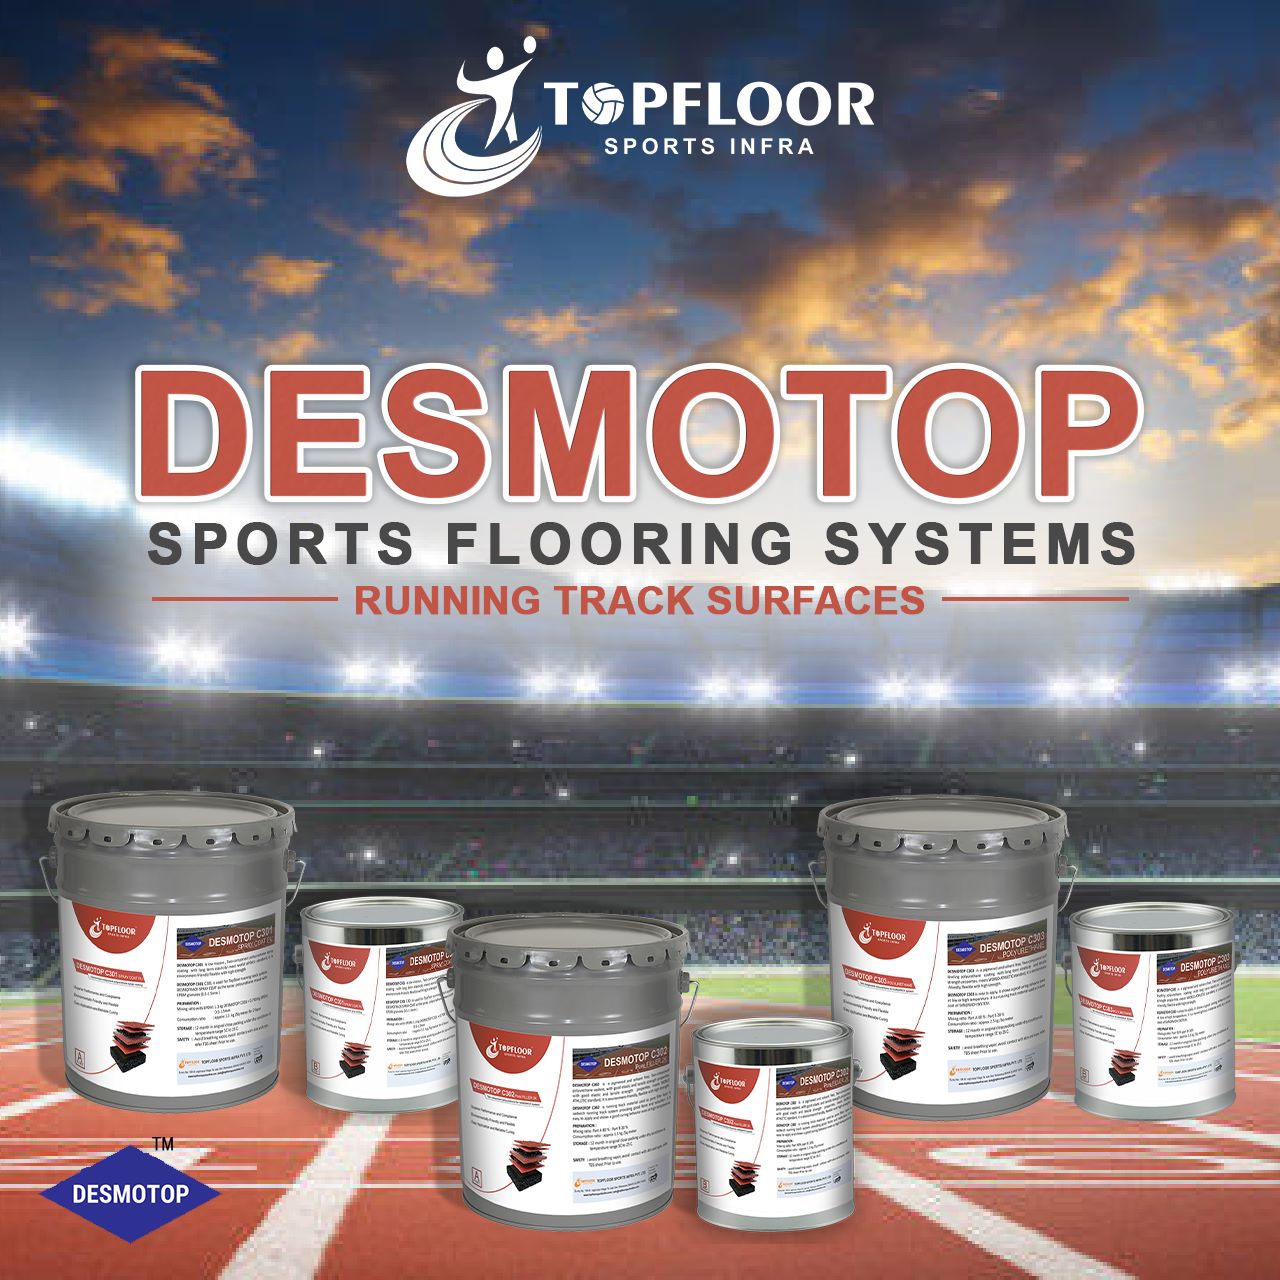 Desmotop Sports Flooring Systems